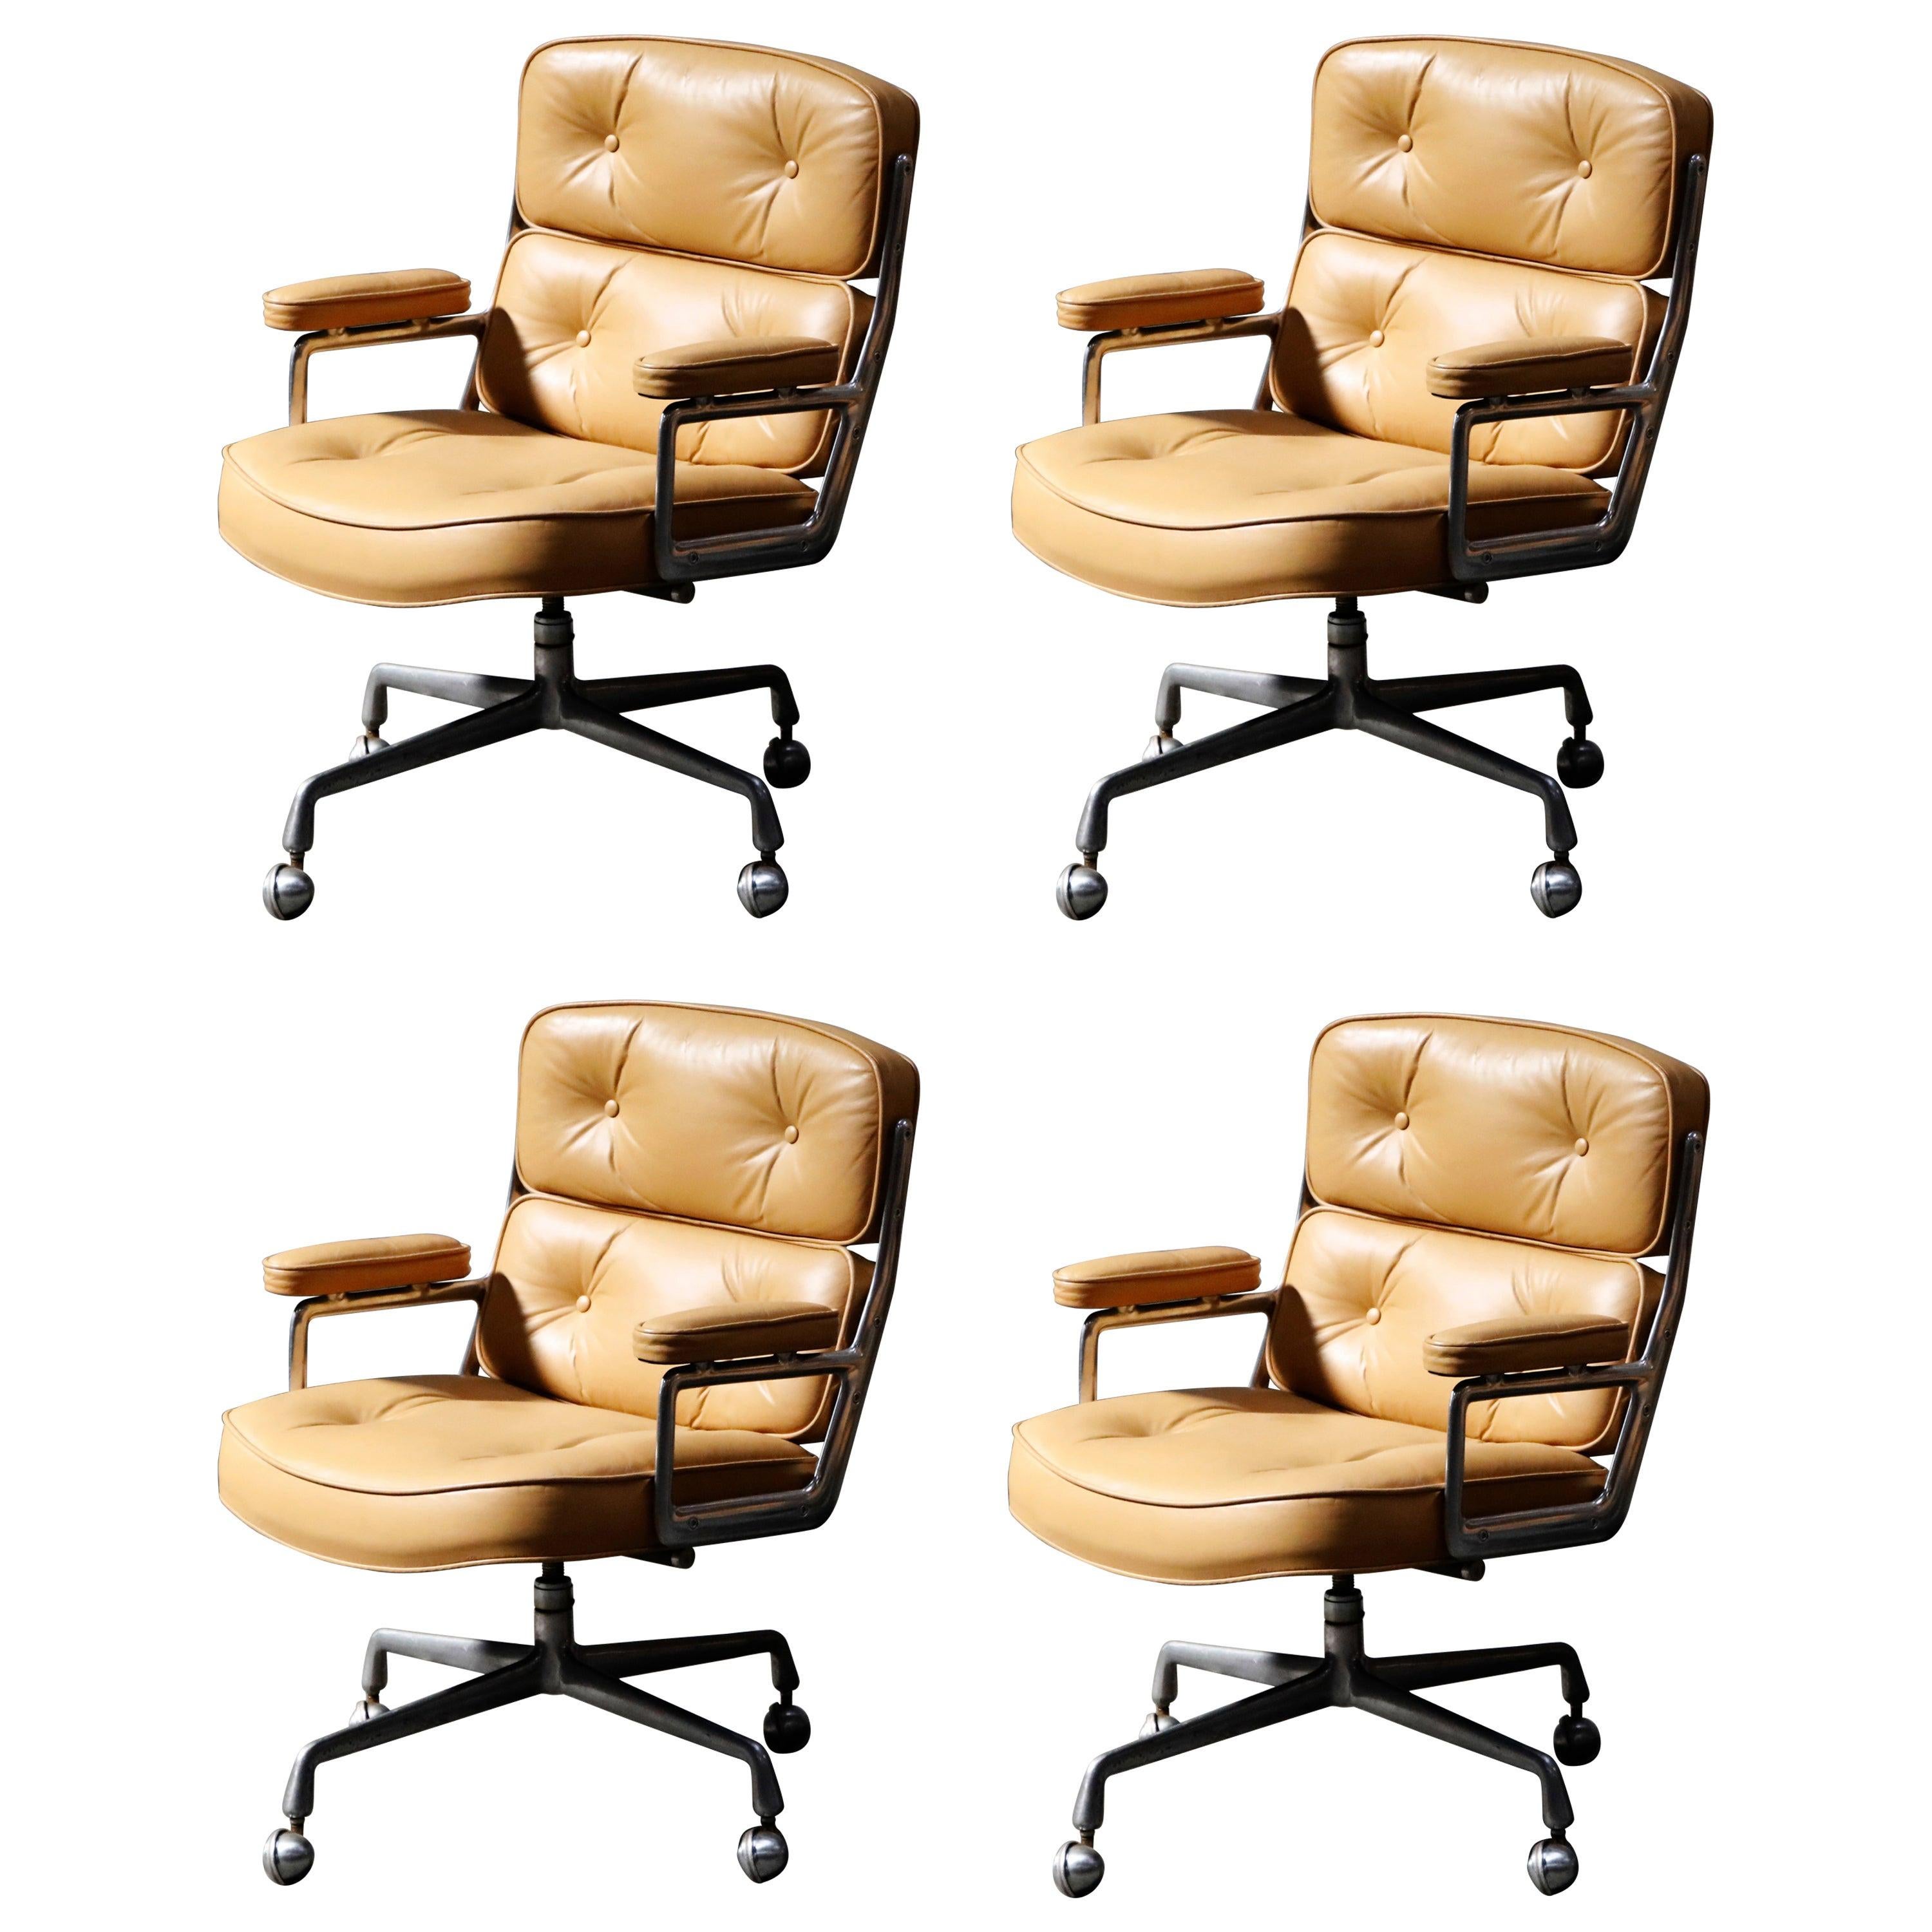 'Time Life' Executive Office Chairs by Charles Eames for Herman Miller, Signed